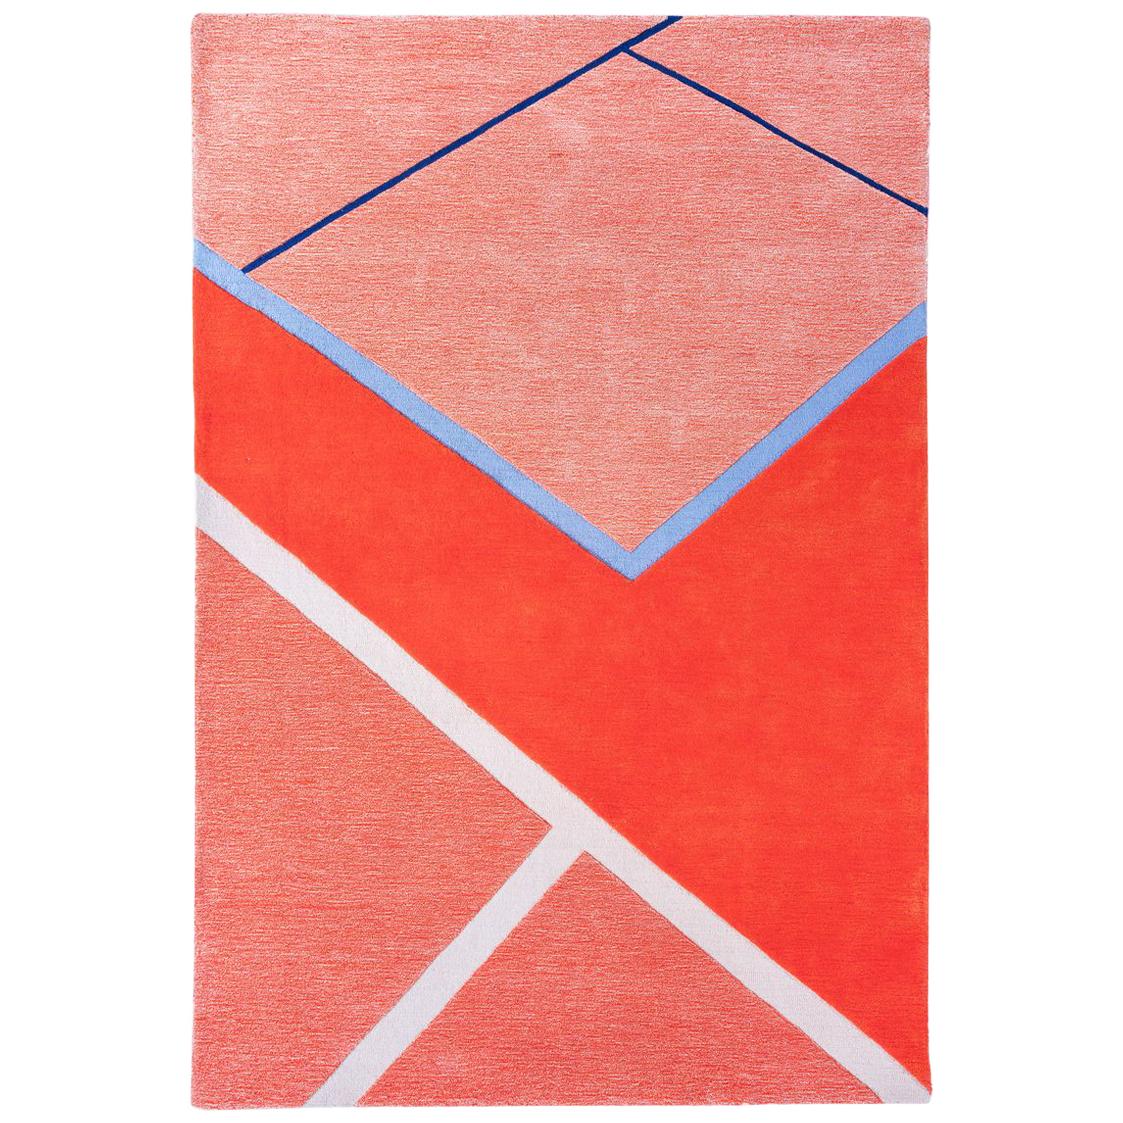 "Court Series" Field House Rug by Pieces, Modern Hand-Tufted Colorful Red Carpet For Sale